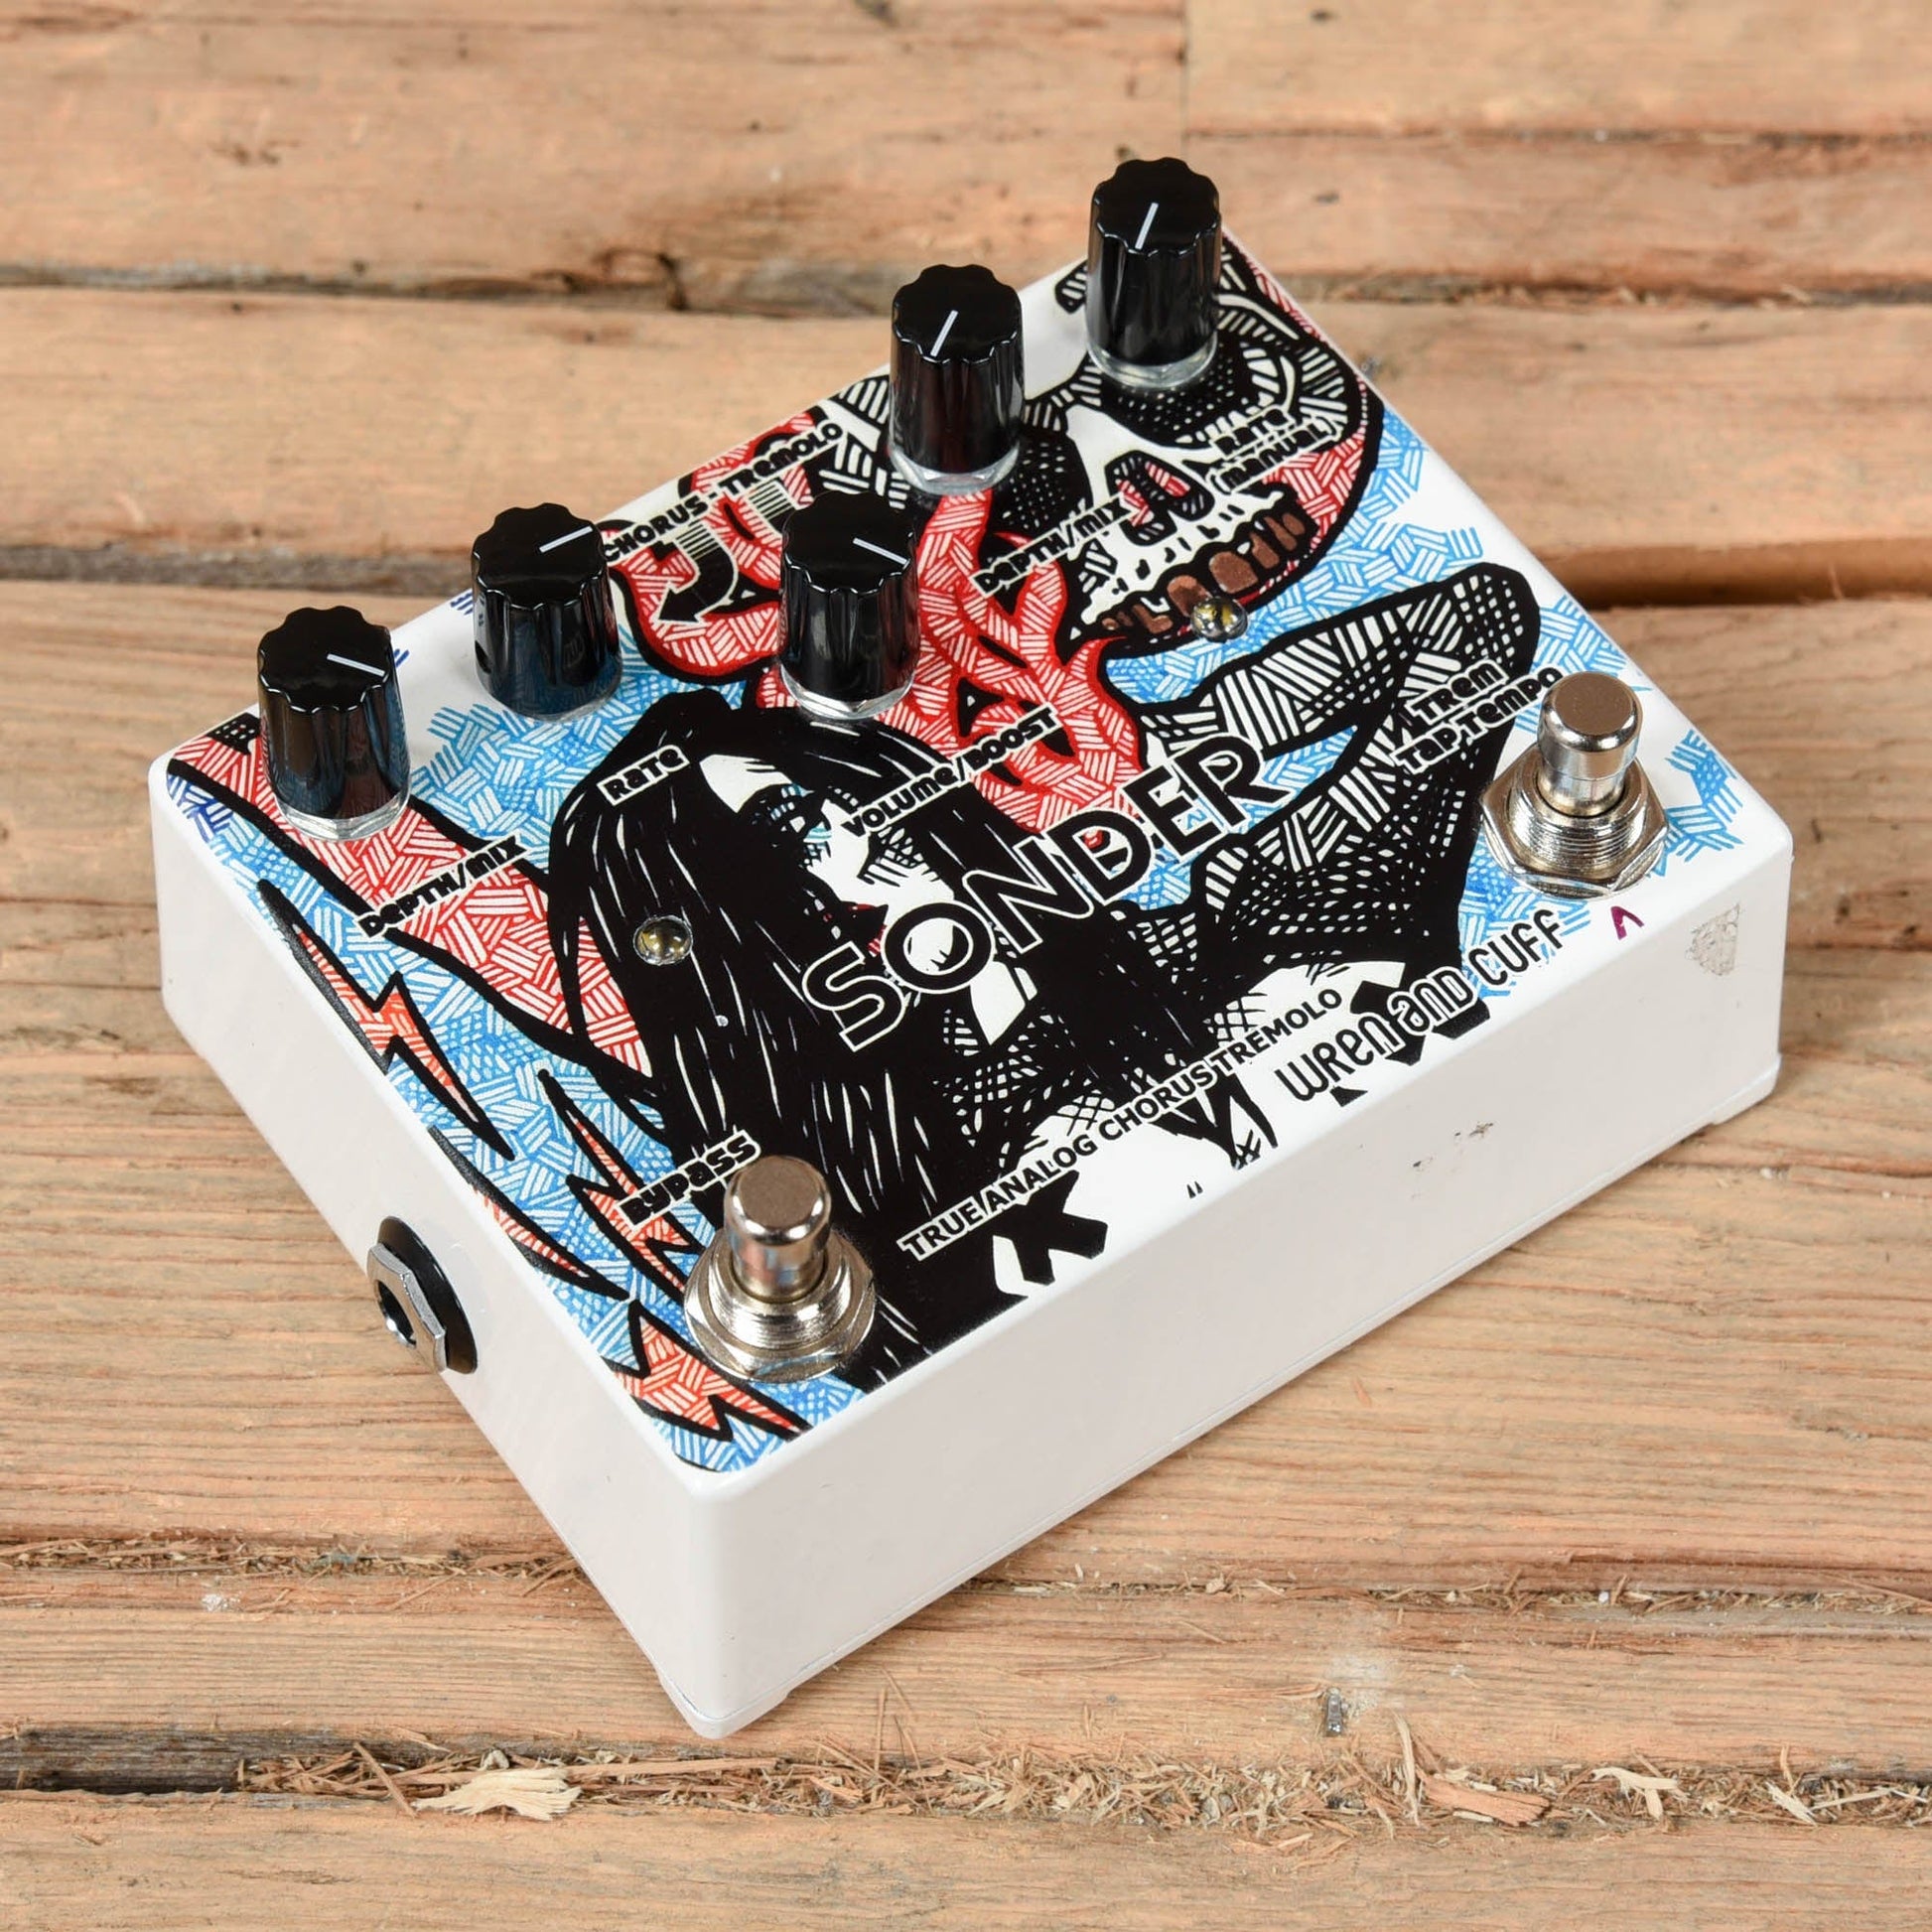 Wren and Cuff Sonder Effects and Pedals / Multi-Effect Unit